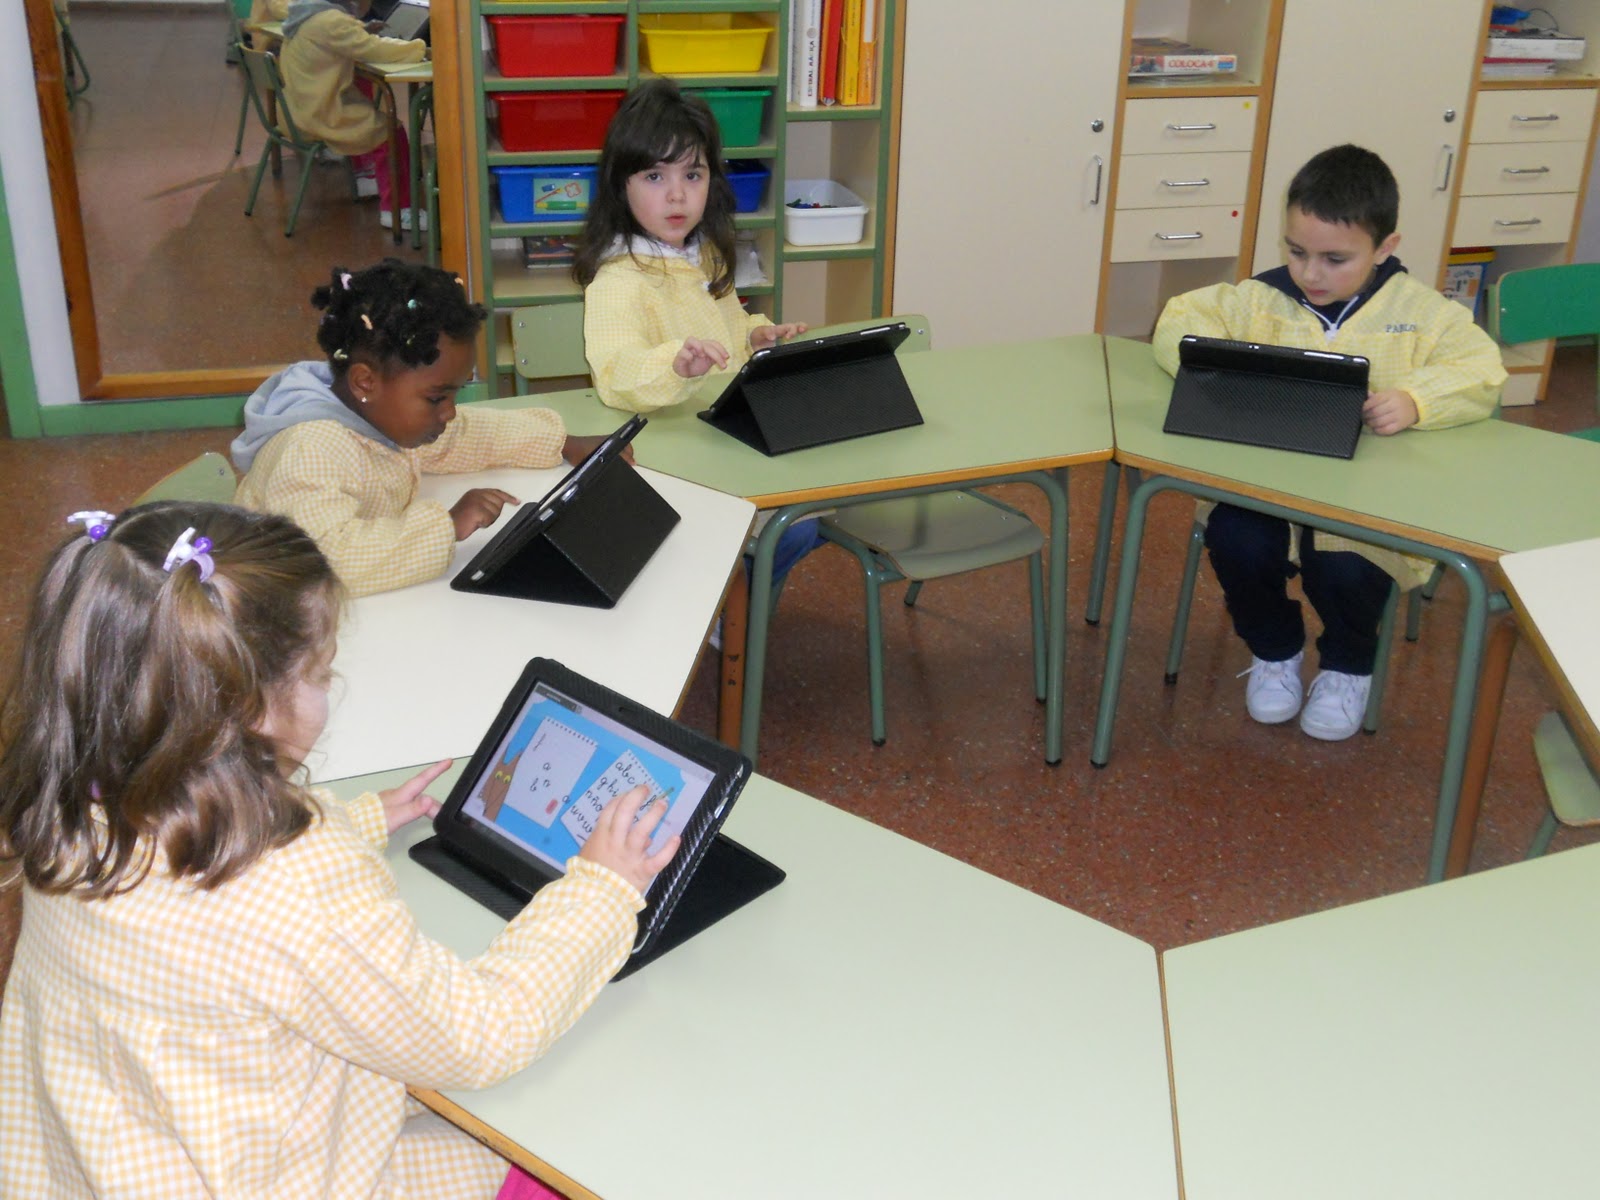 Kids using tablets in class